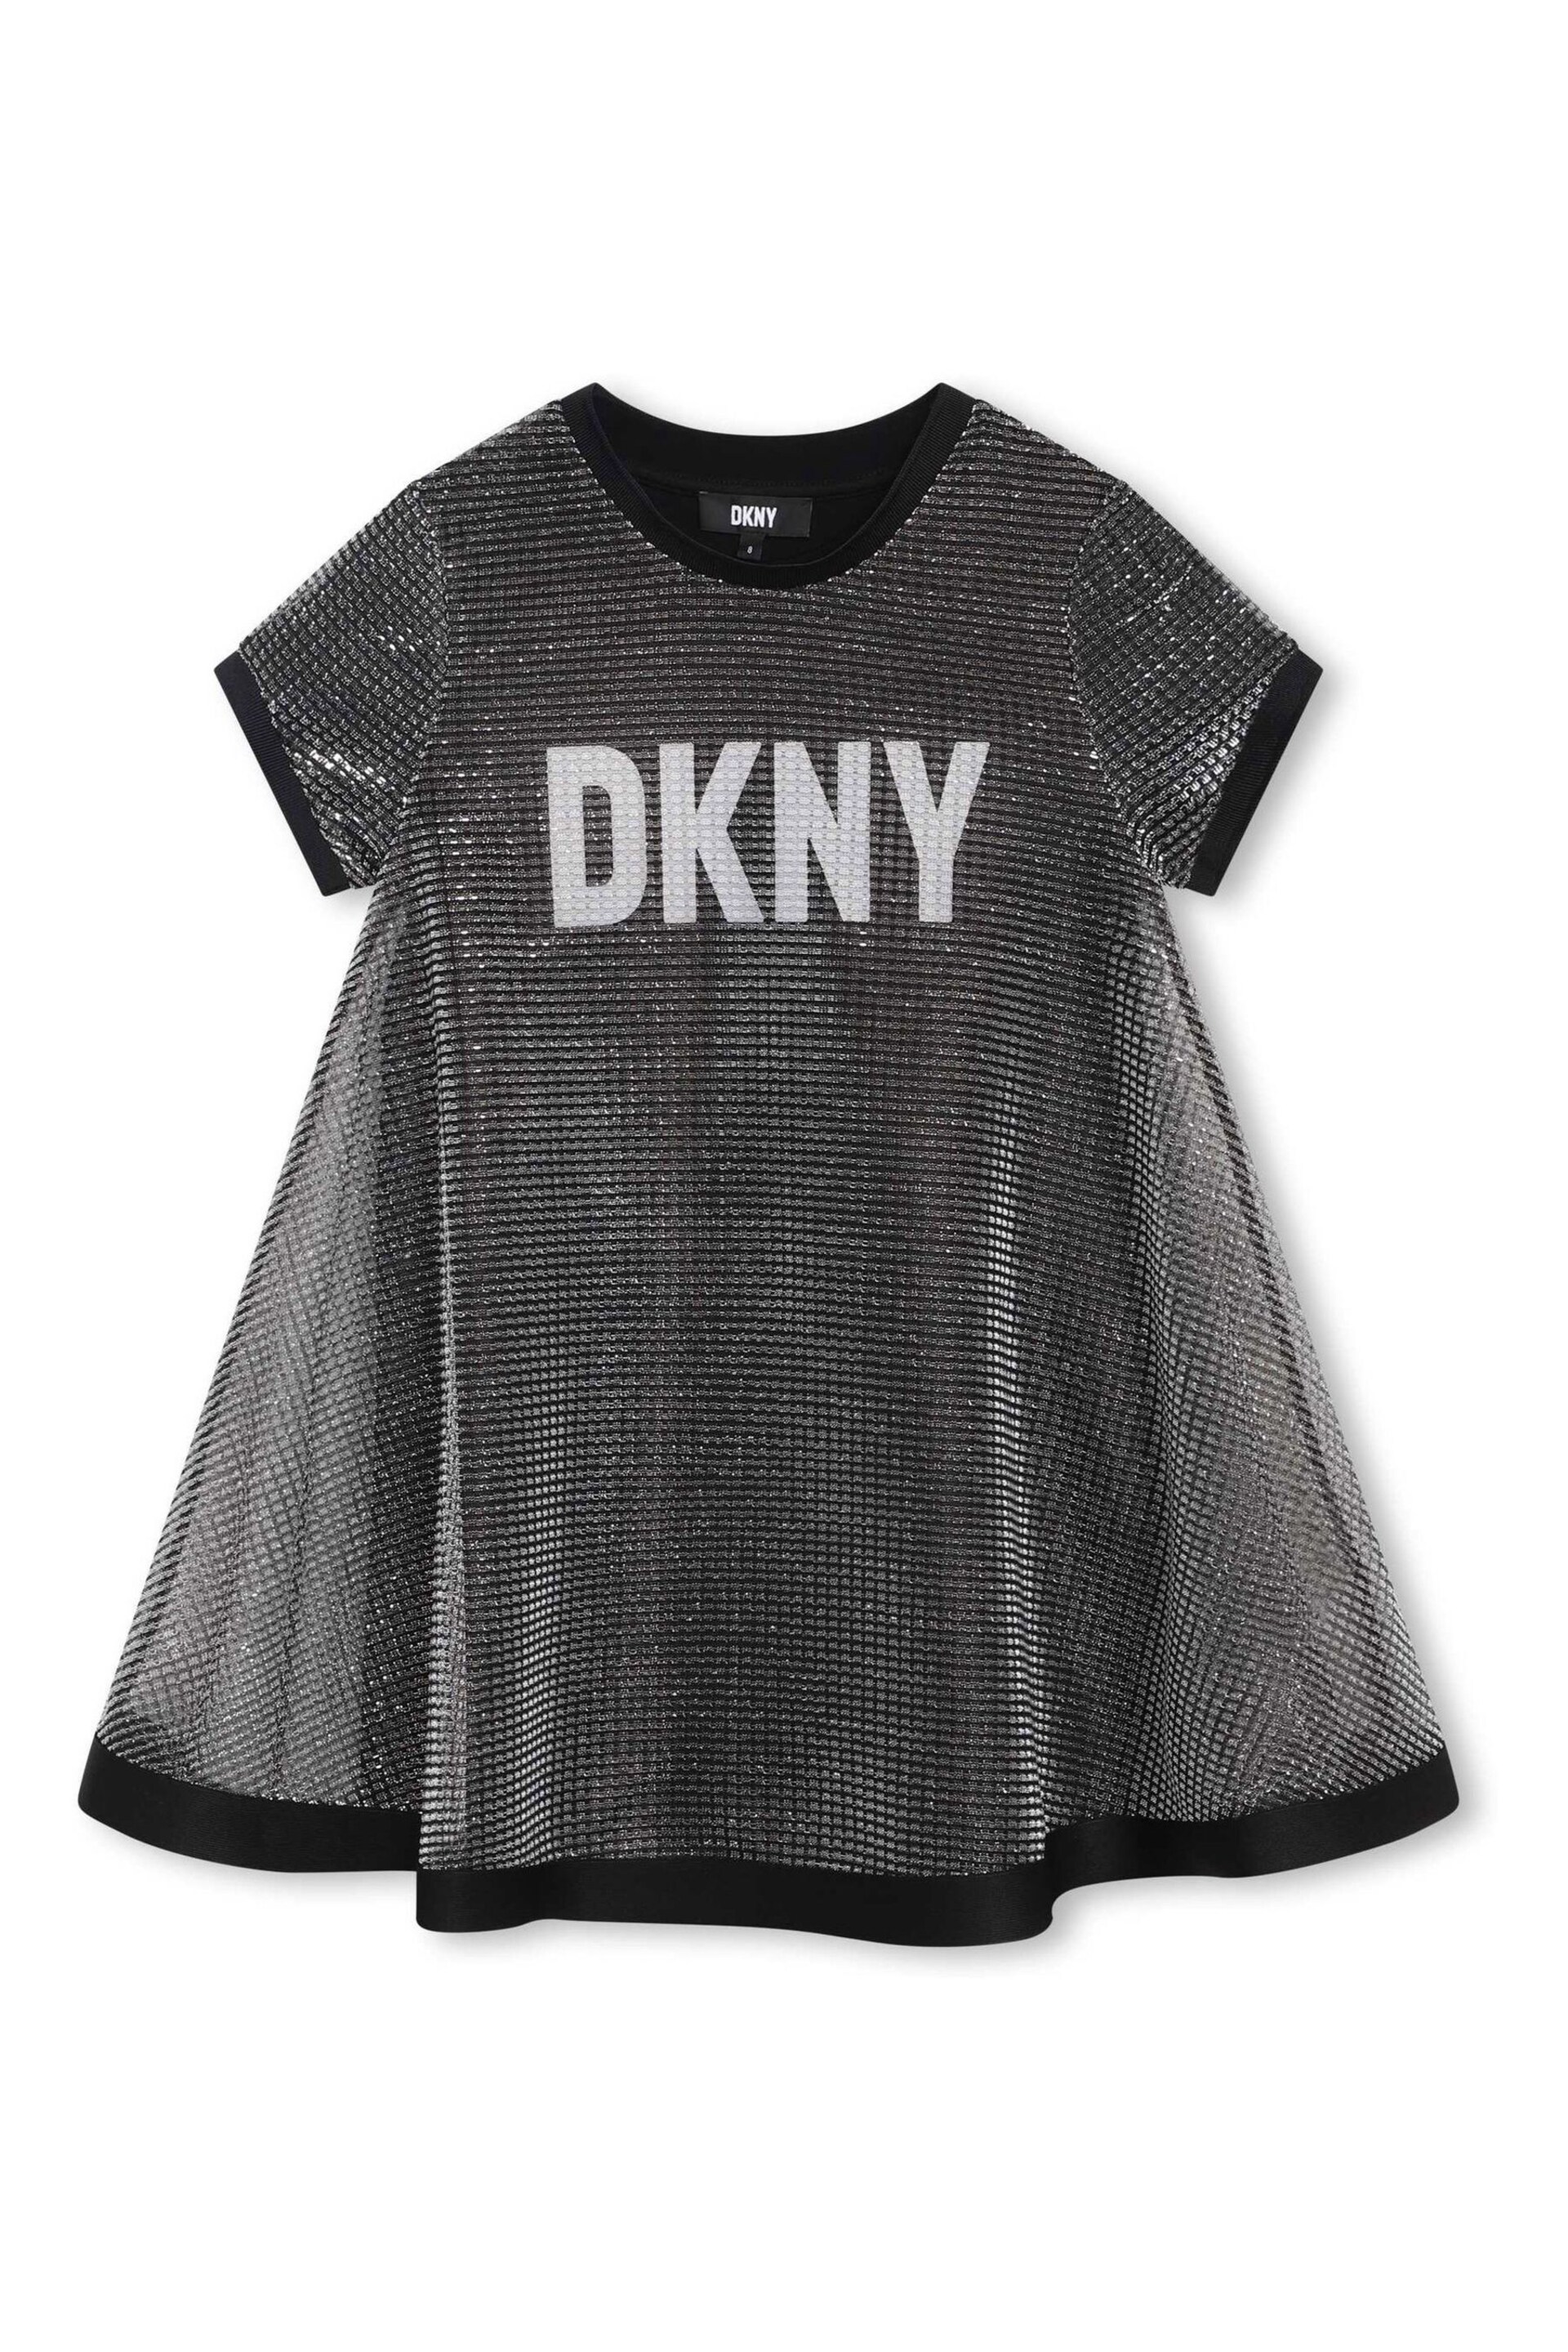 DKNY Silver 2-In-1 Layered Logo Dress - Image 2 of 4